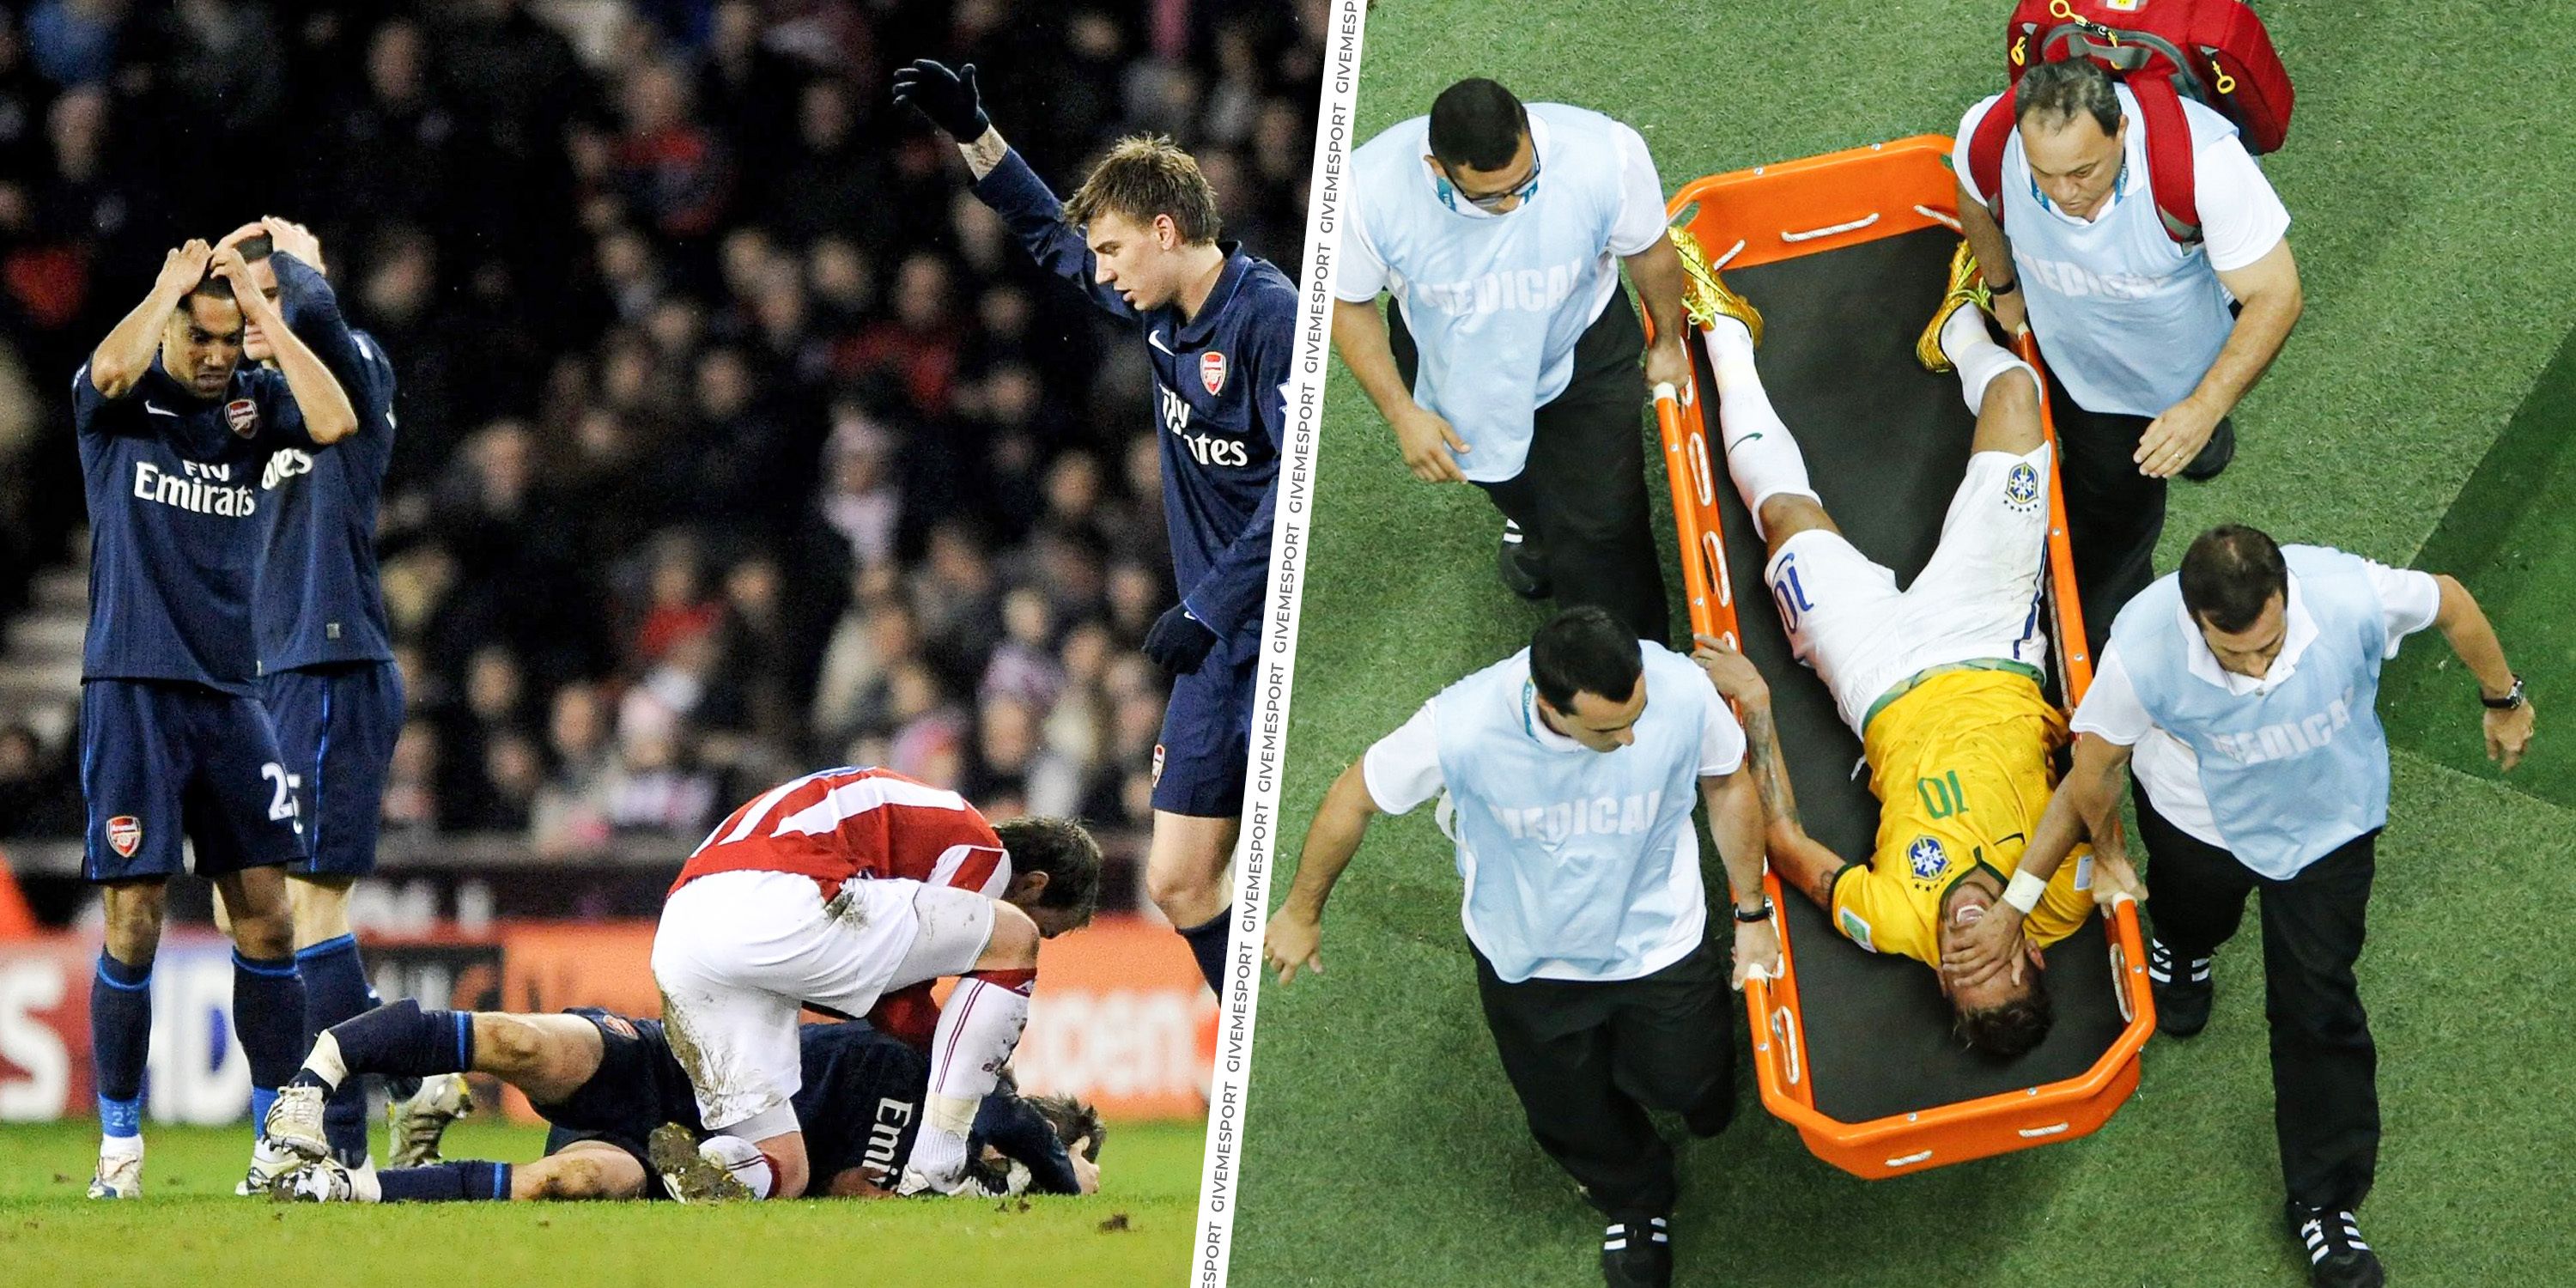 15 worst injuries in football